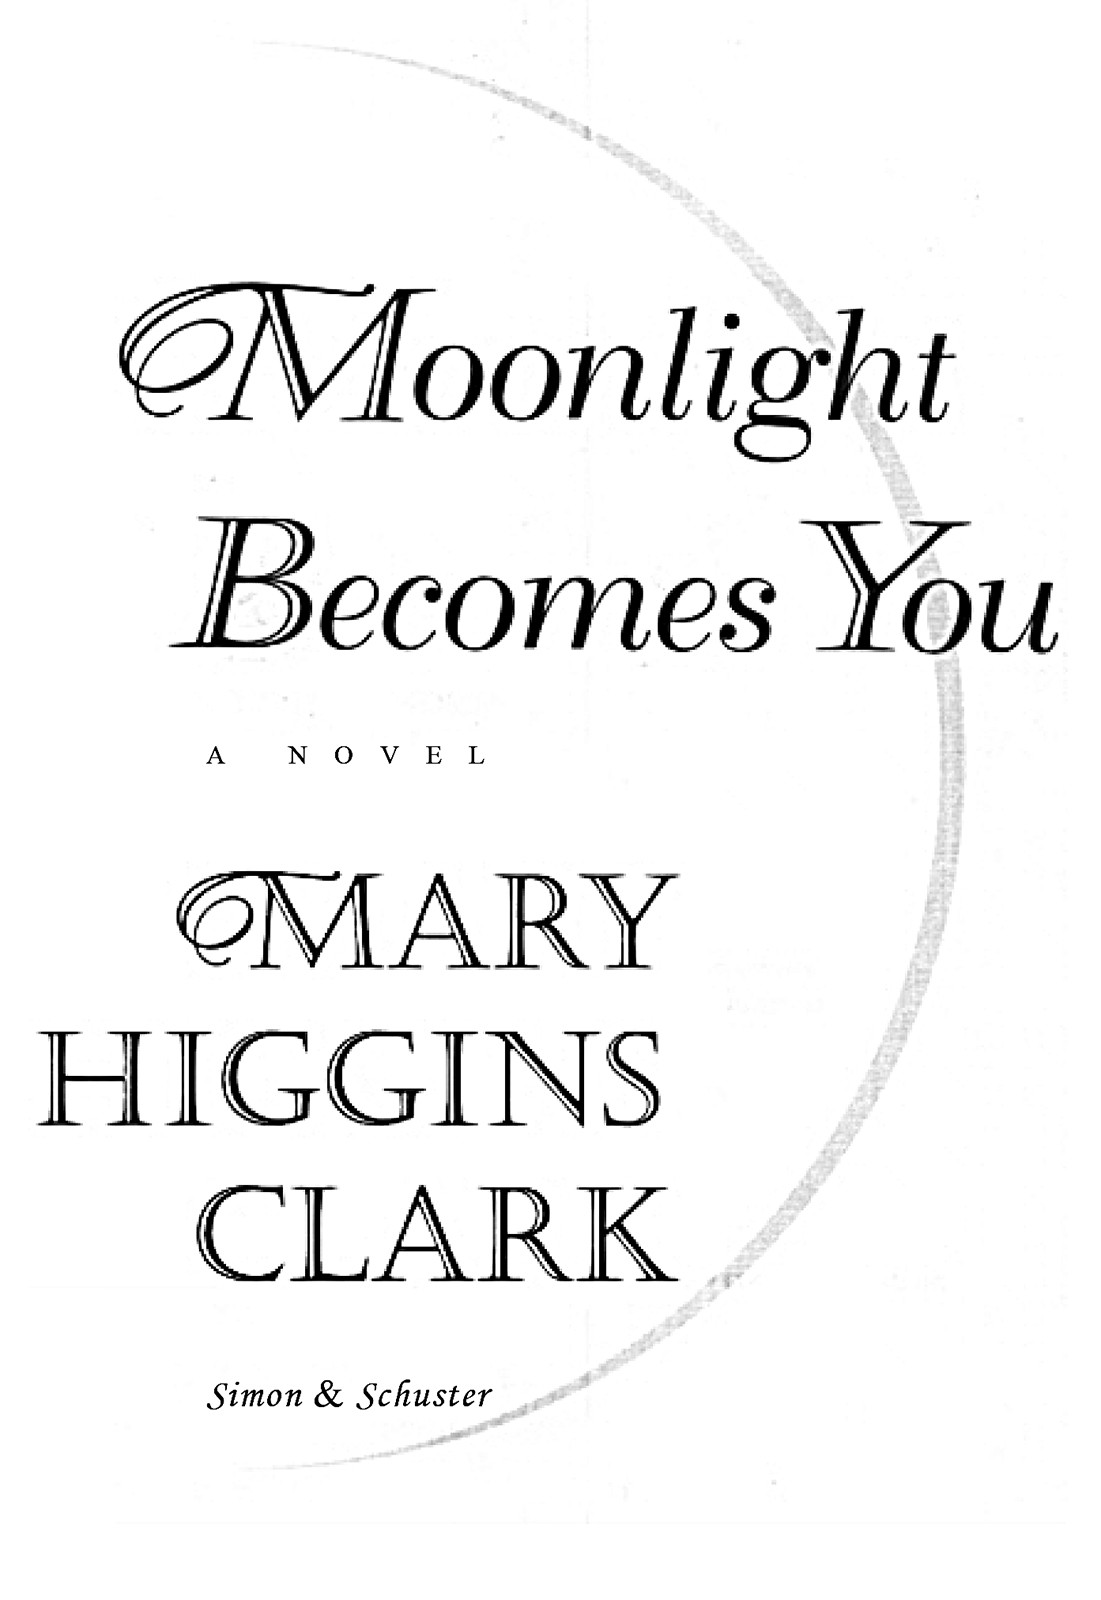 Moonlight Becomes You by Mary Higgins Clark